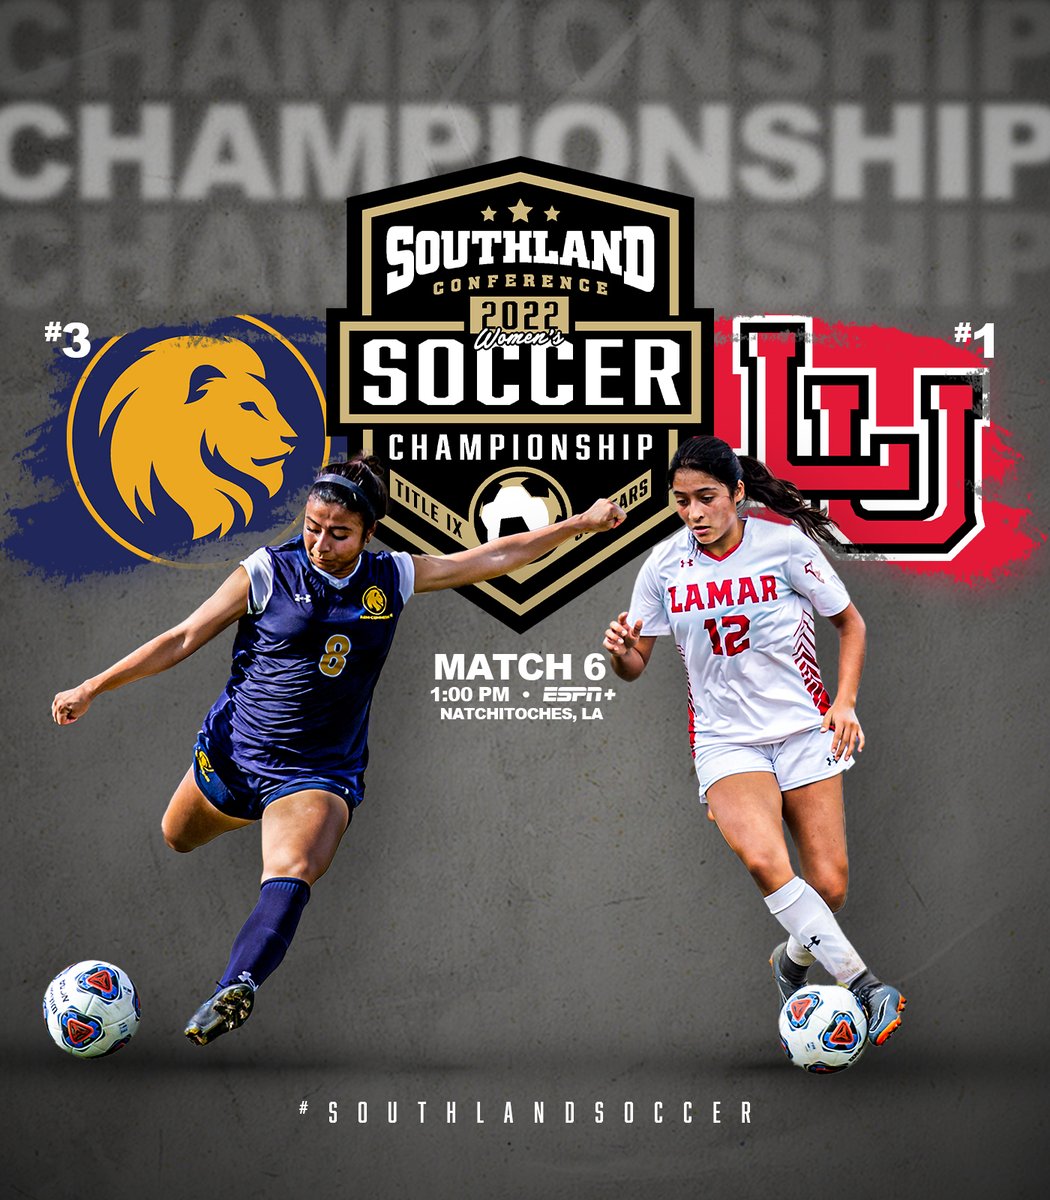 𝗪𝗘𝗟𝗖𝗢𝗠𝗘 𝗧𝗢 𝗖𝗛𝗔𝗠𝗣𝗜𝗢𝗡𝗦𝗛𝗜𝗣 𝗦𝗨𝗡𝗗𝗔𝗬 ⚽️ It's top-seeded Lamar taking on third-seeded Texas A&M-Commerce at 1 PM in what should be a classic! @ESPNPlus | sland.social/22socchamp Stats 📊 | sland.social/22socchampstats